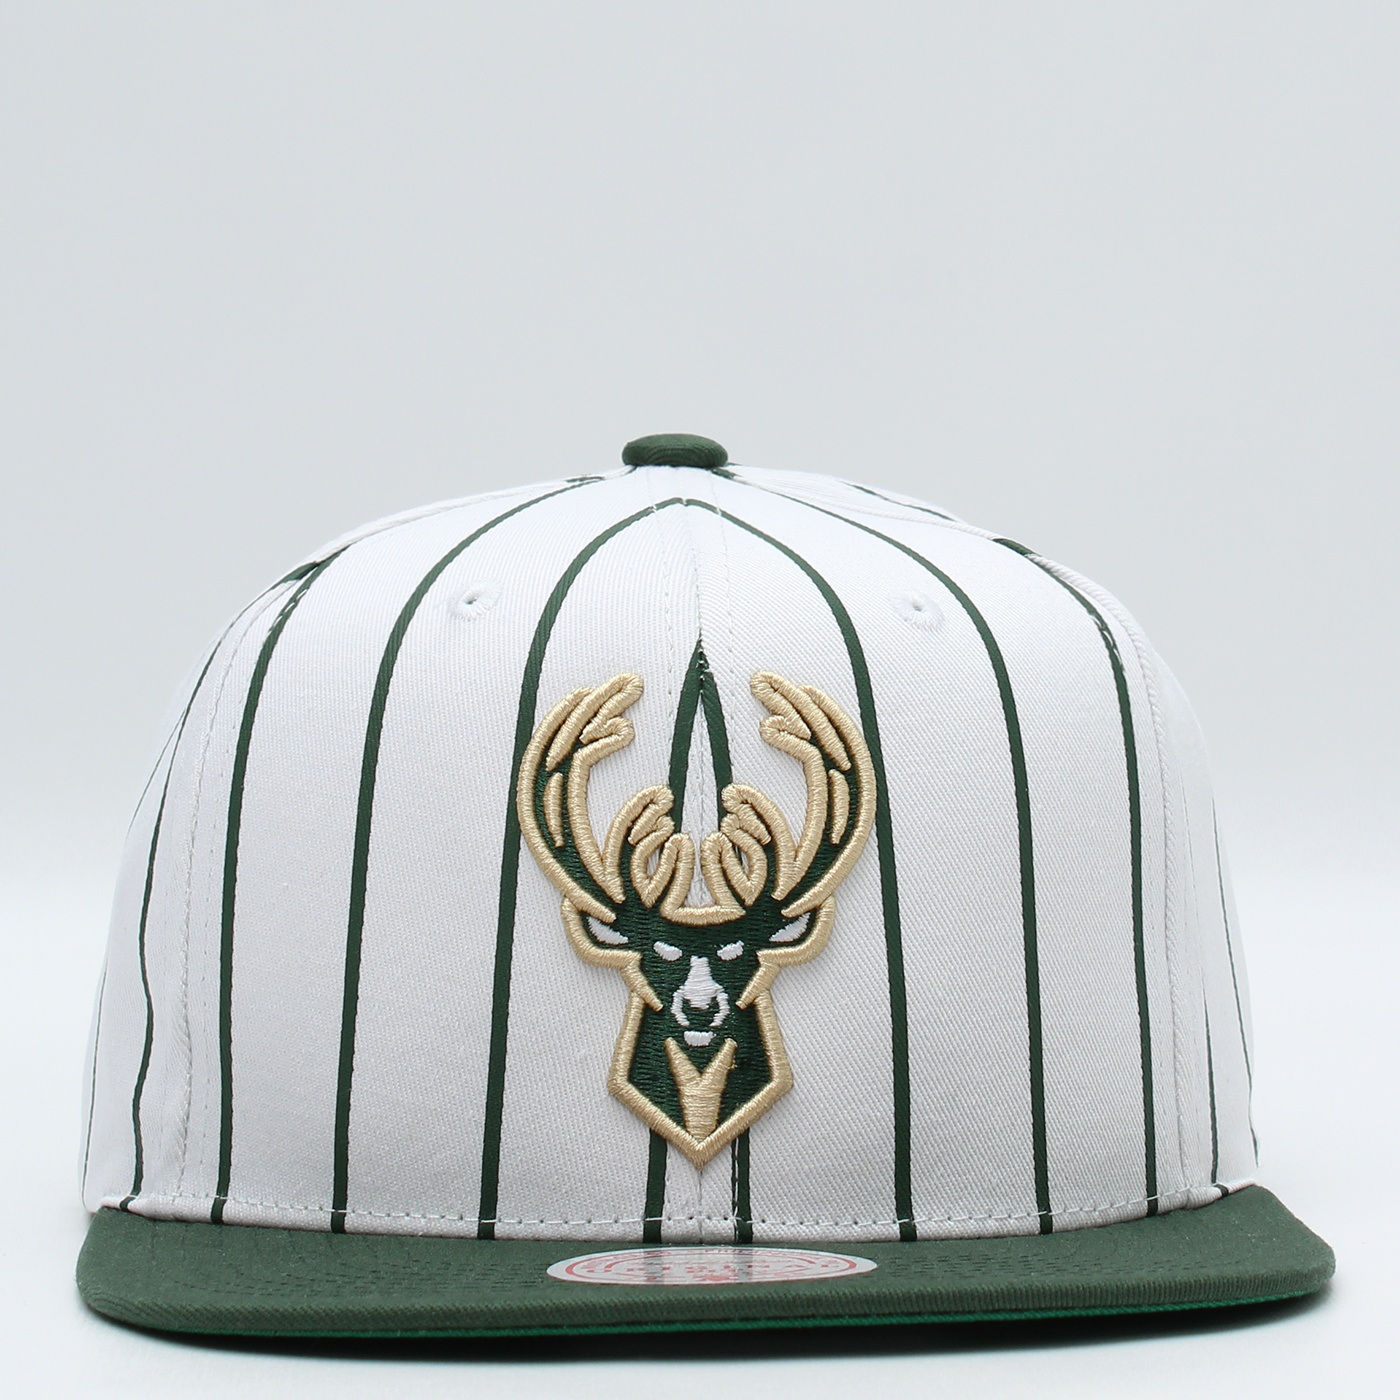 Mitchell and Ness Bucks What The Pinstripe Snapback Hat